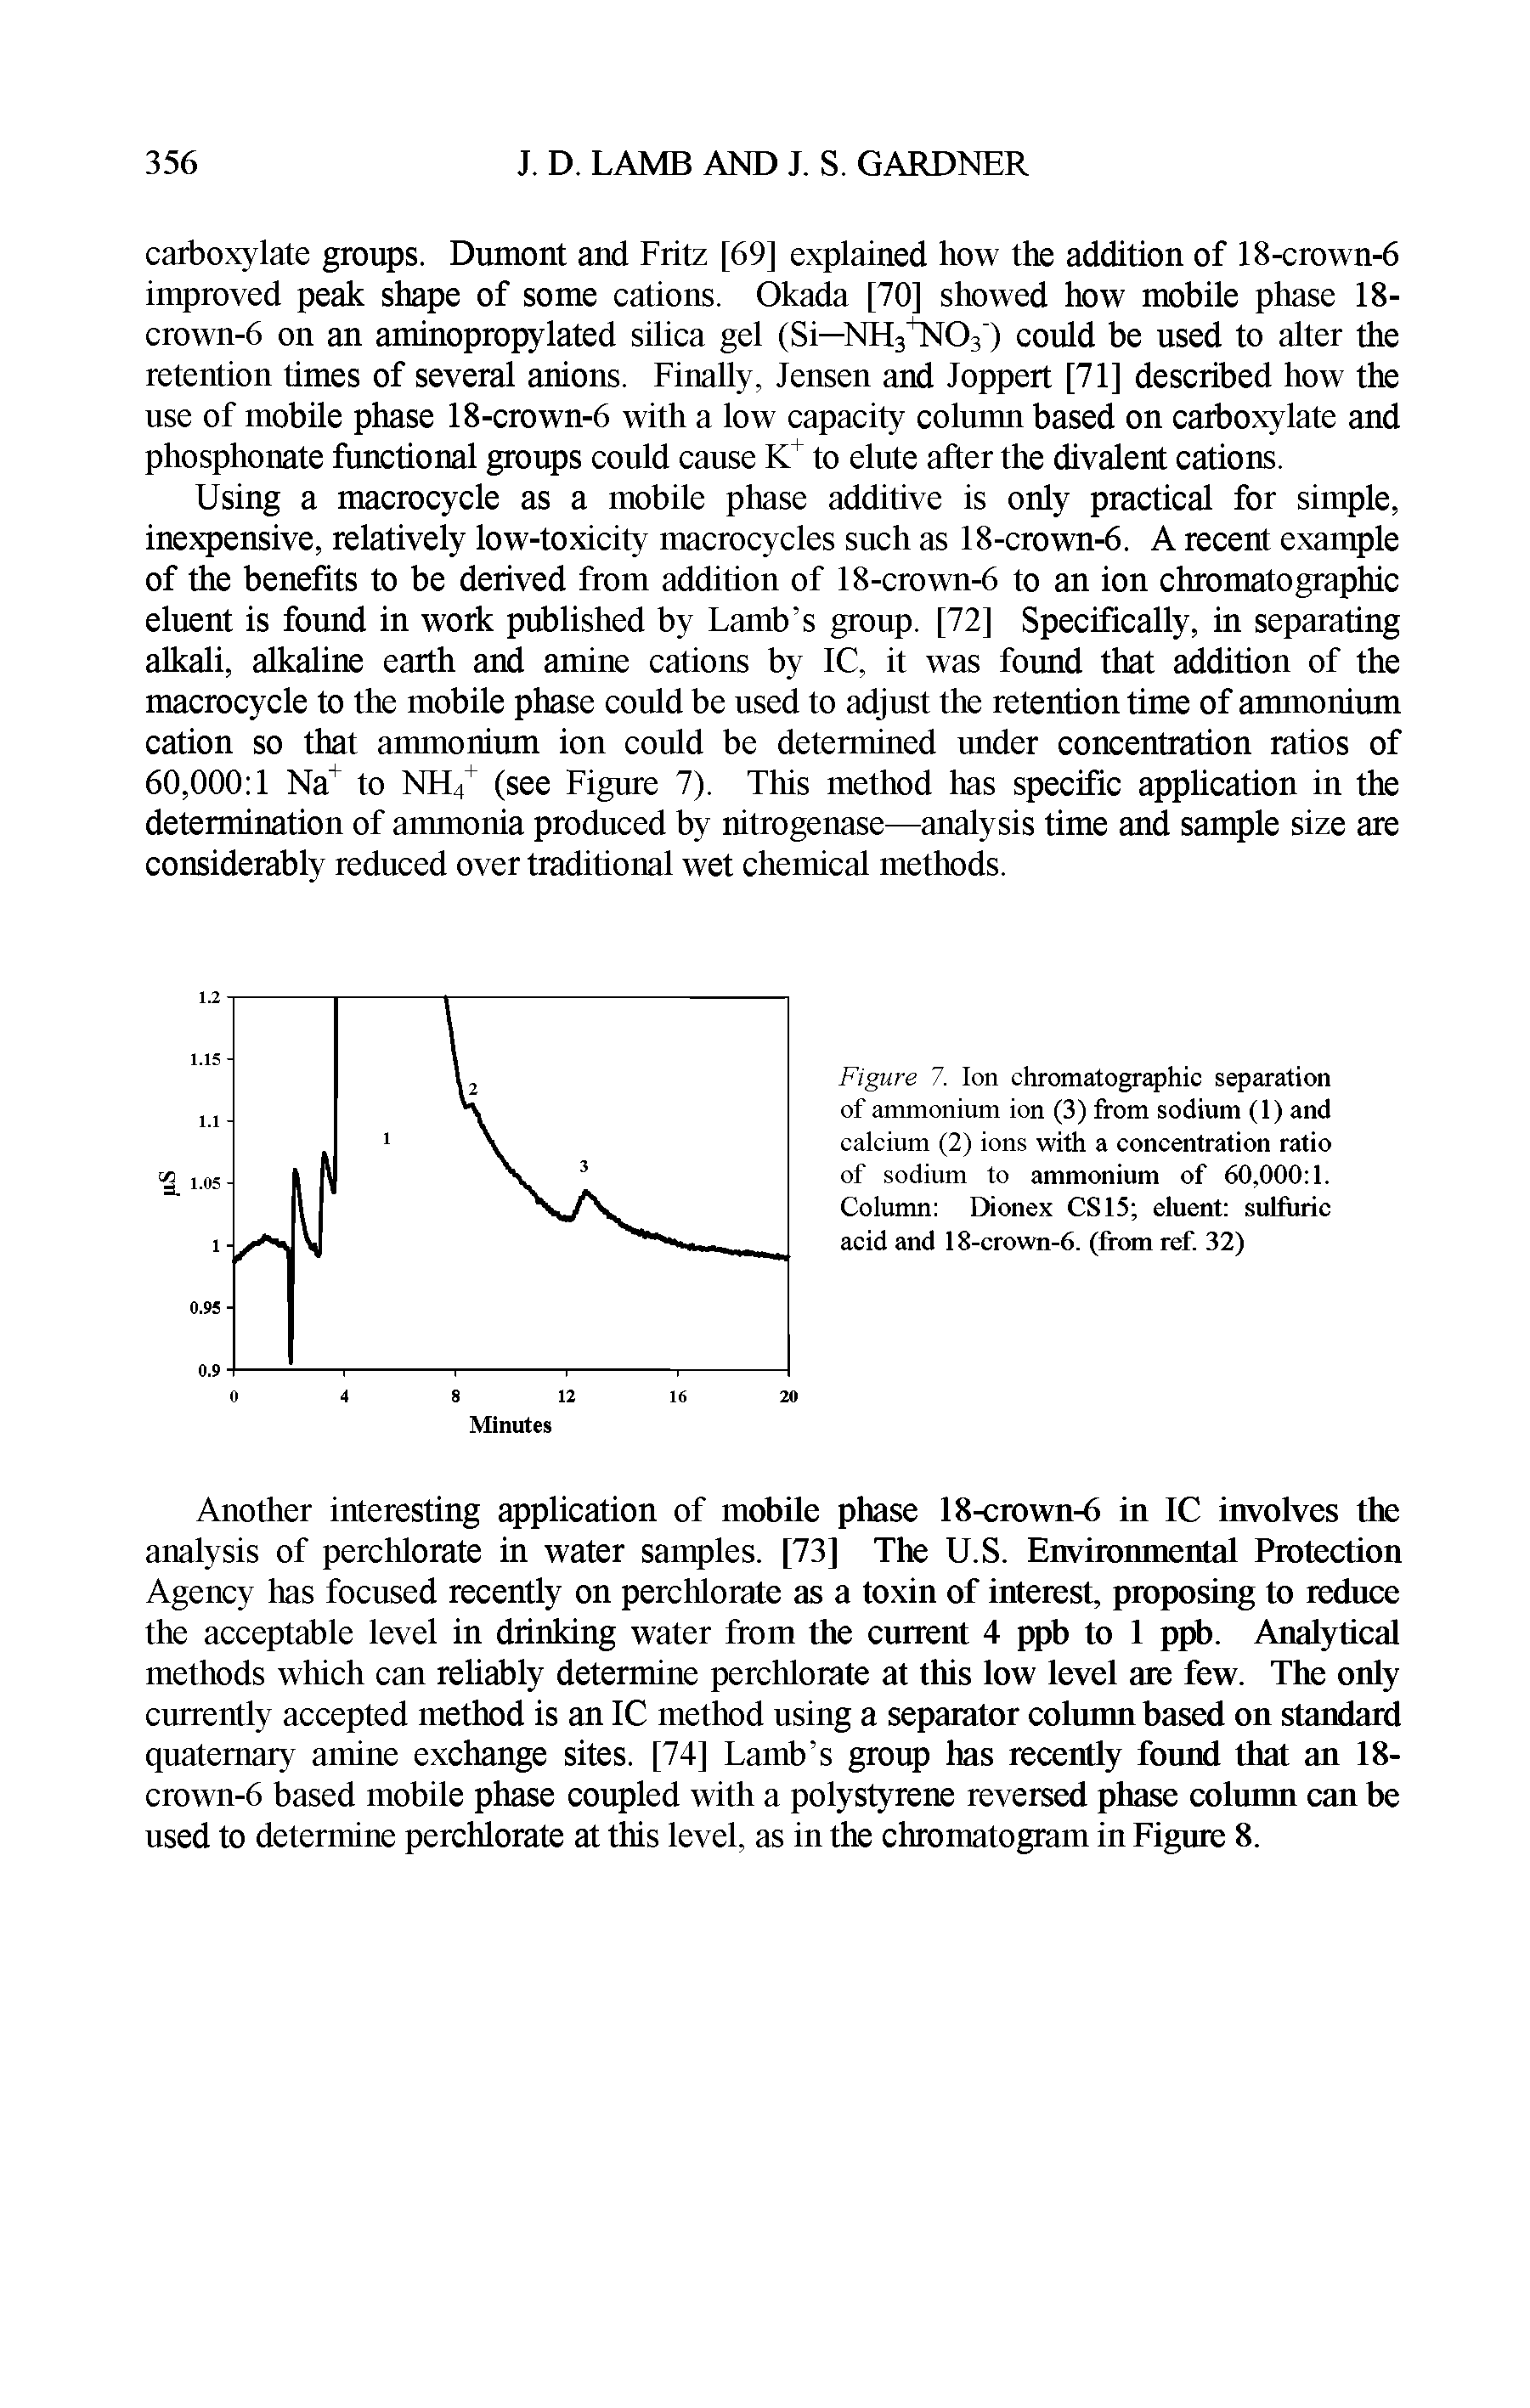 Figure 7. Ion chromatographic separation of ammonium ion (3) from sodium (1) and calcium (2) ions with a concentration ratio of sodium to ammonium of 60,000 1. Column Dionex CS15 eluent sulfuric acid and 18-crown-6. (from ref. 32)...